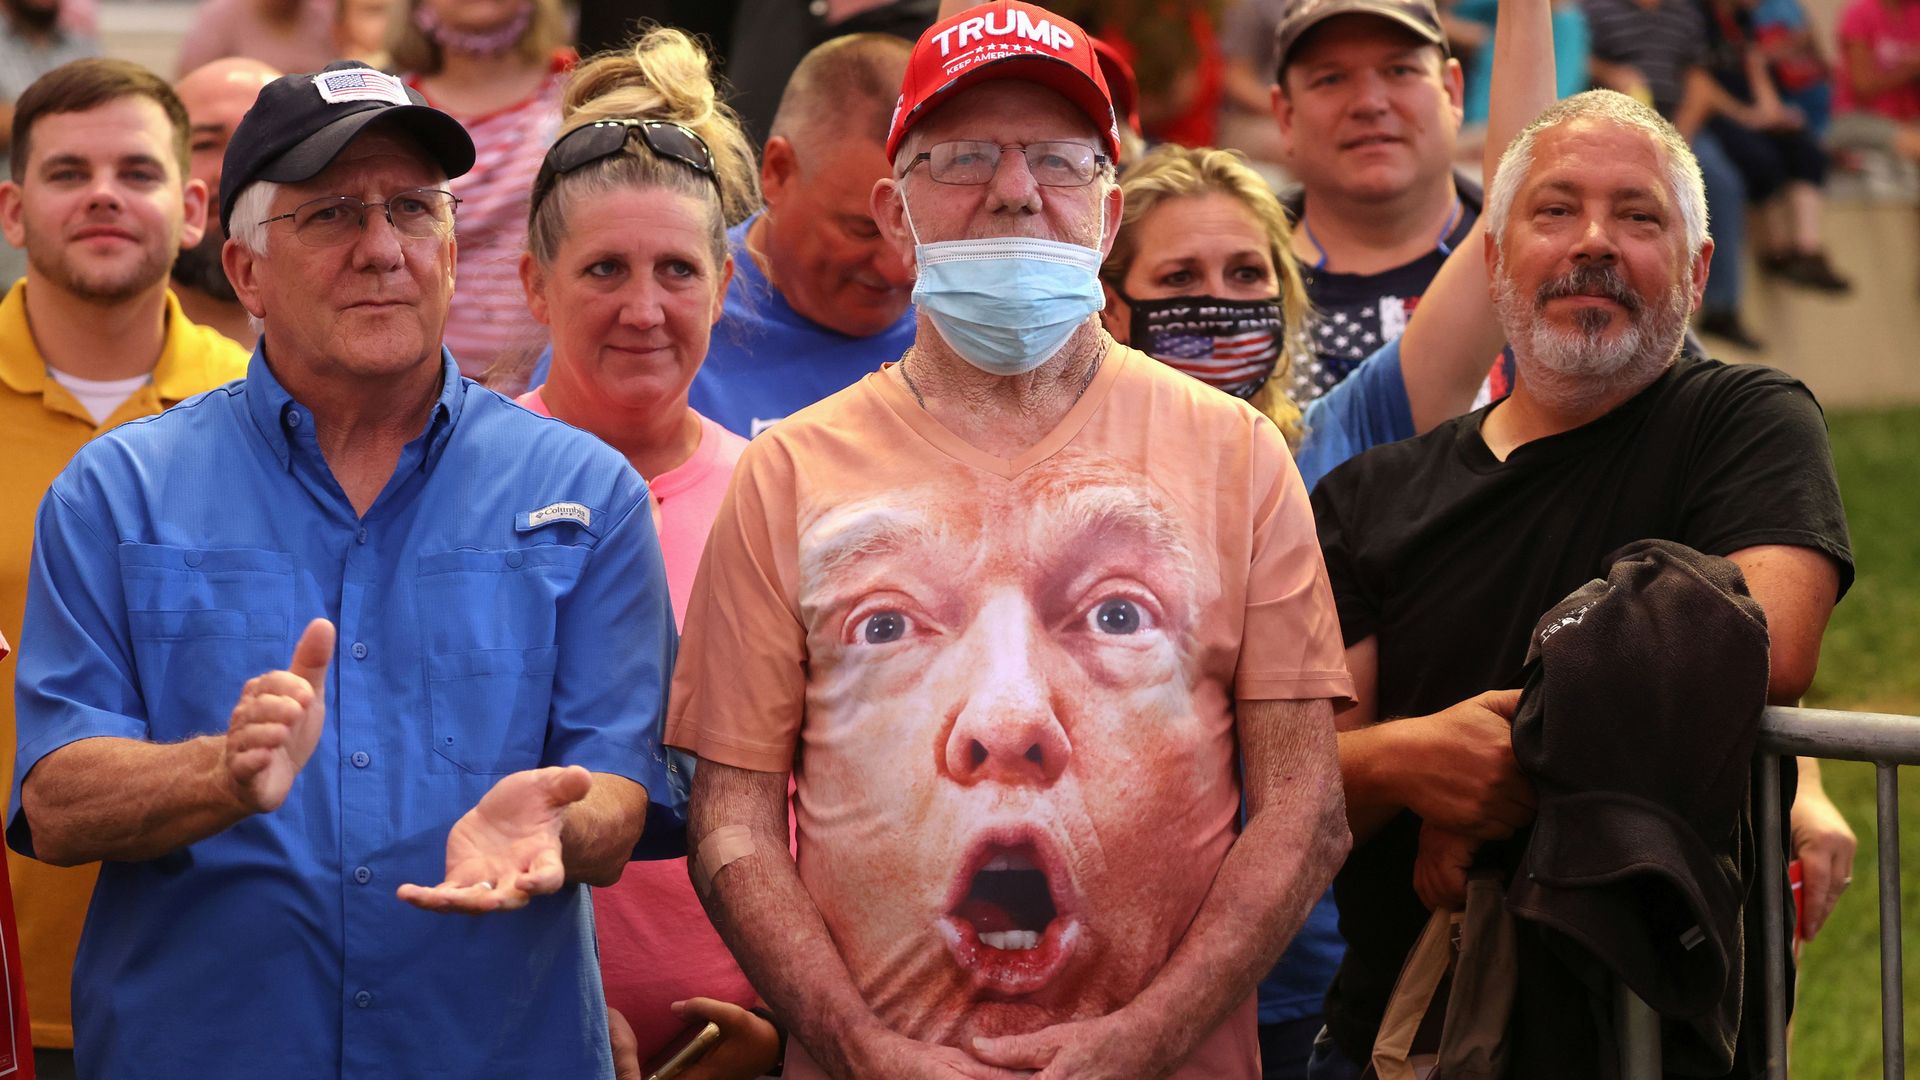 Trump supporters standing at a rally.